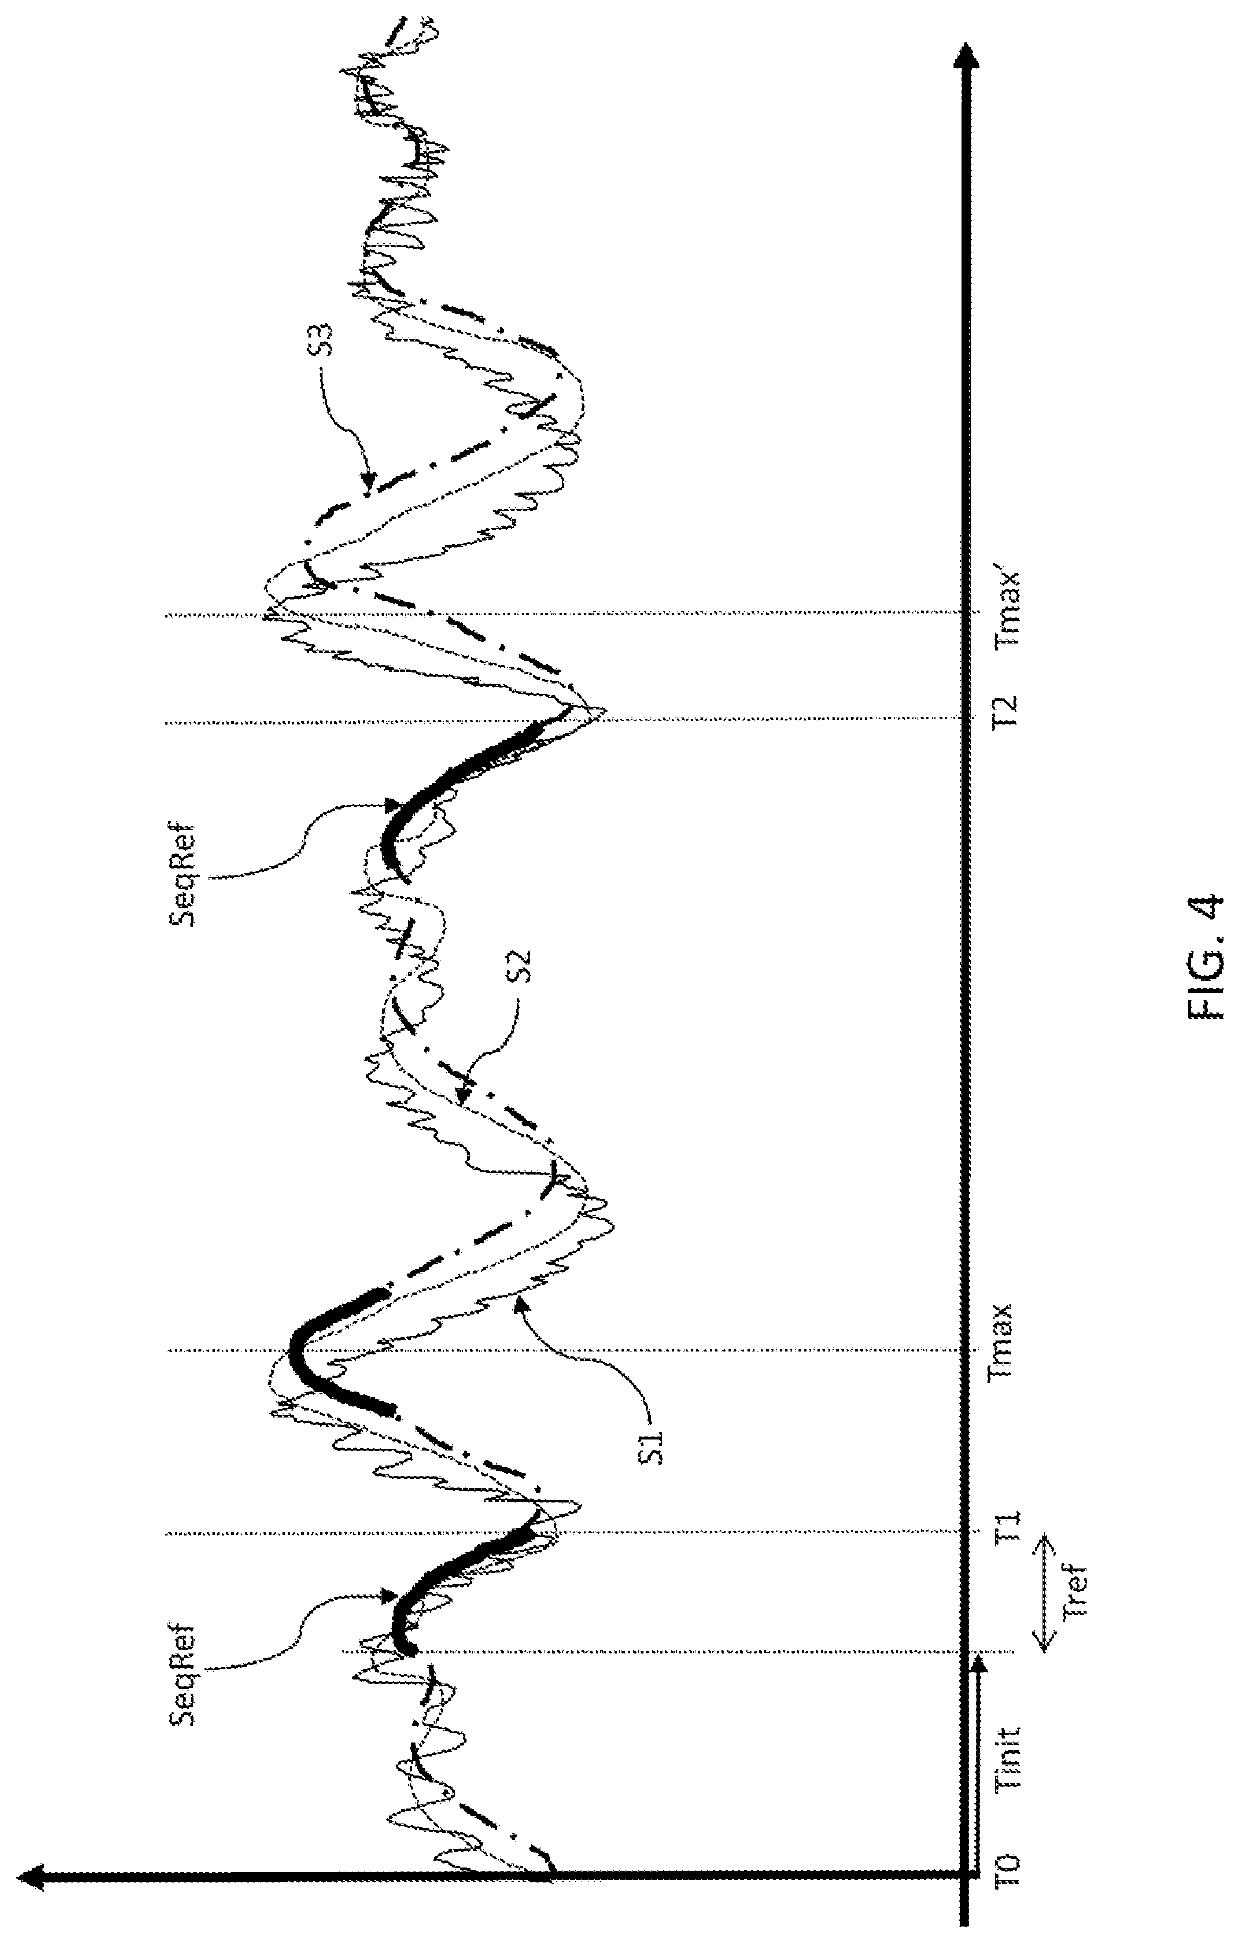 Method for determining the instantaneous frequency and phase of a periodic signal